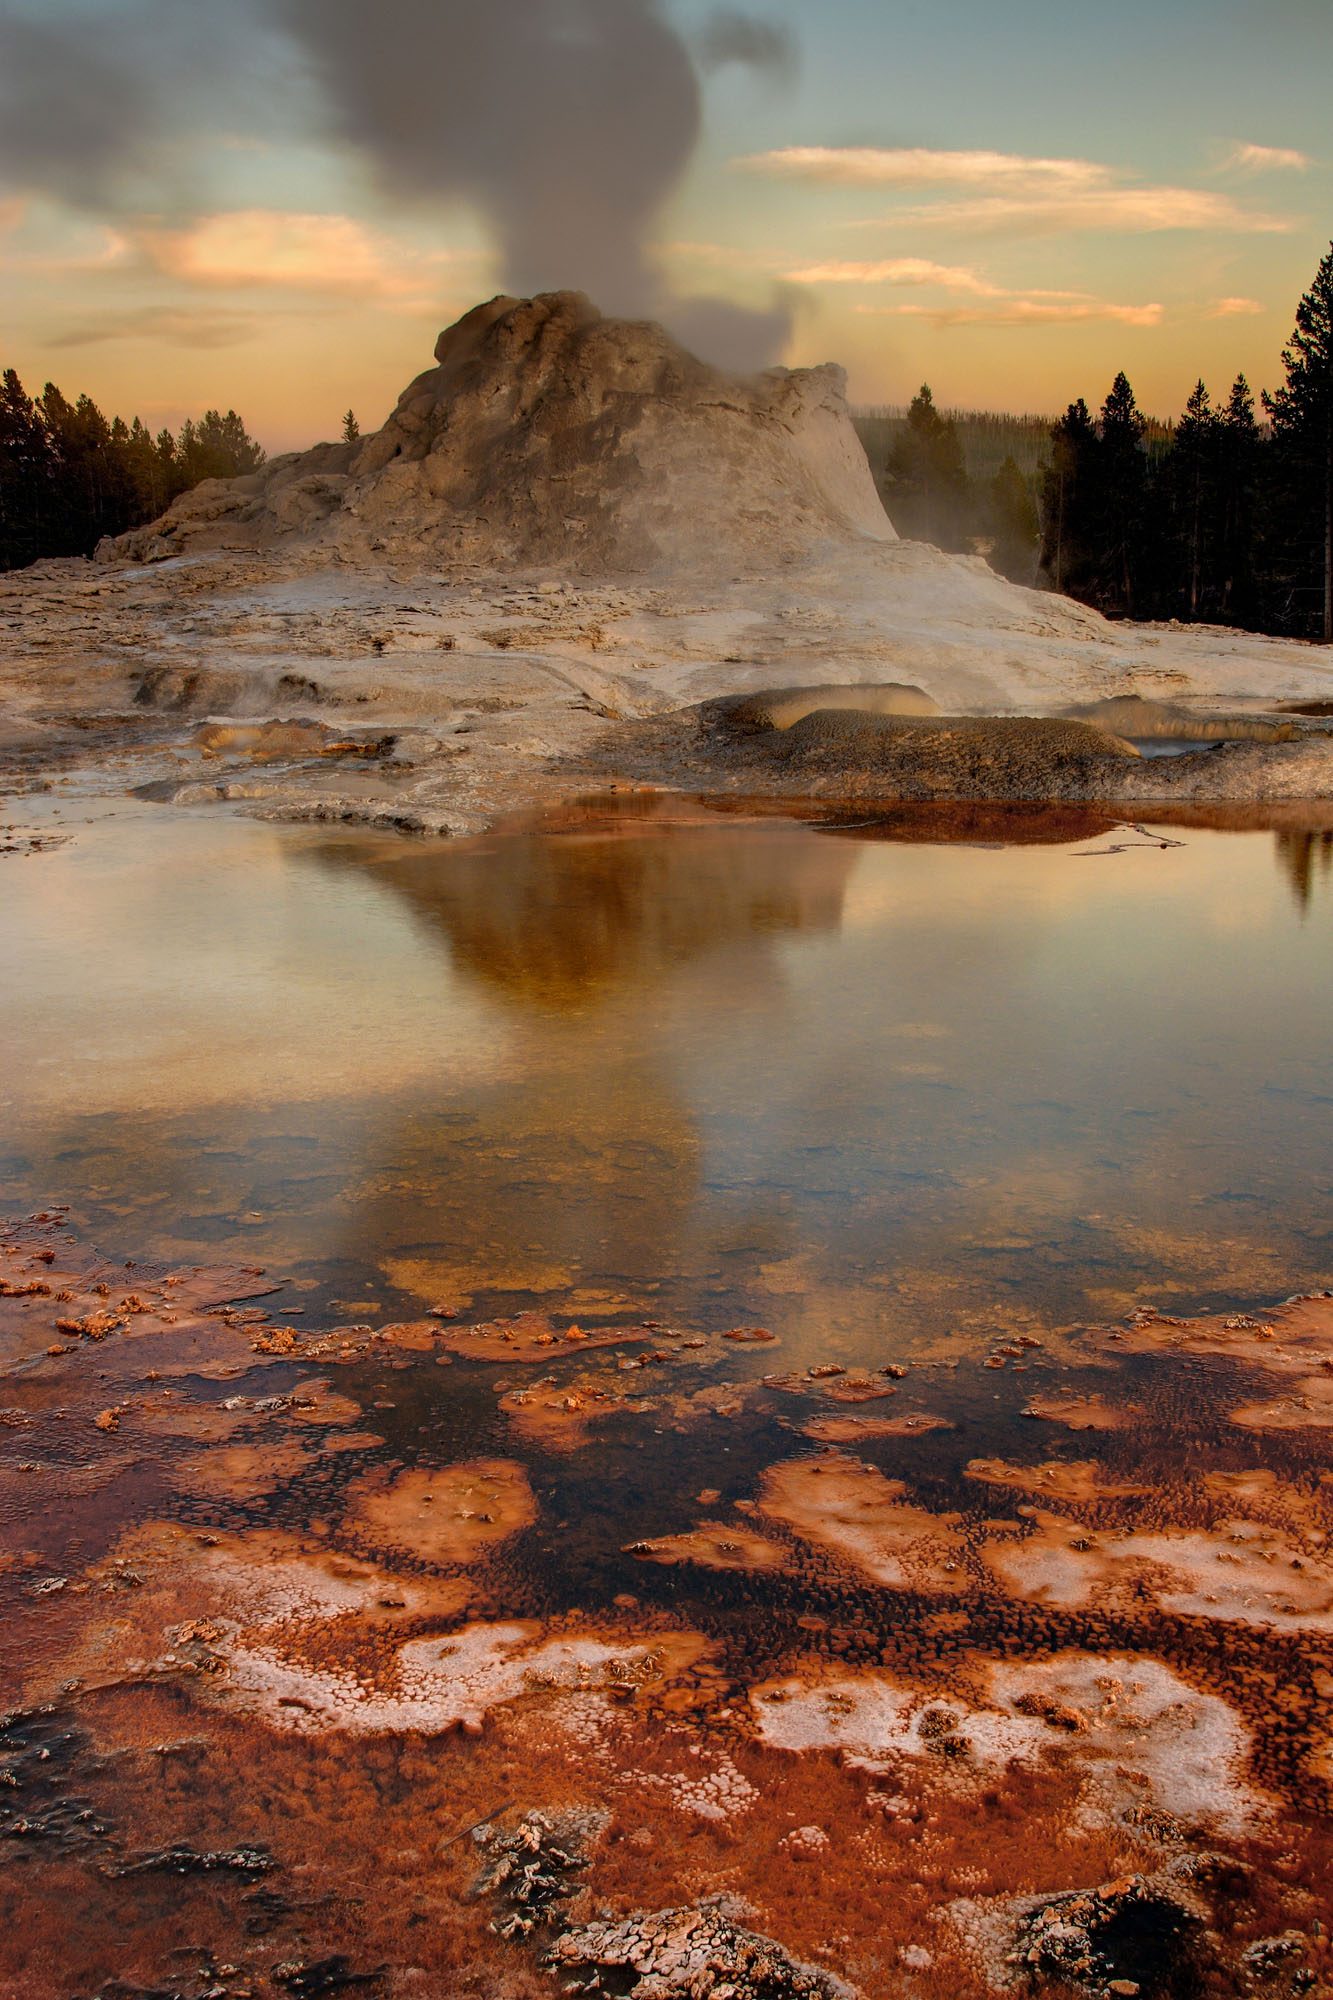 Castle Geyser in the Upper Geyser Basin of Yellowstone, surrounded by red and brown microbe mats.